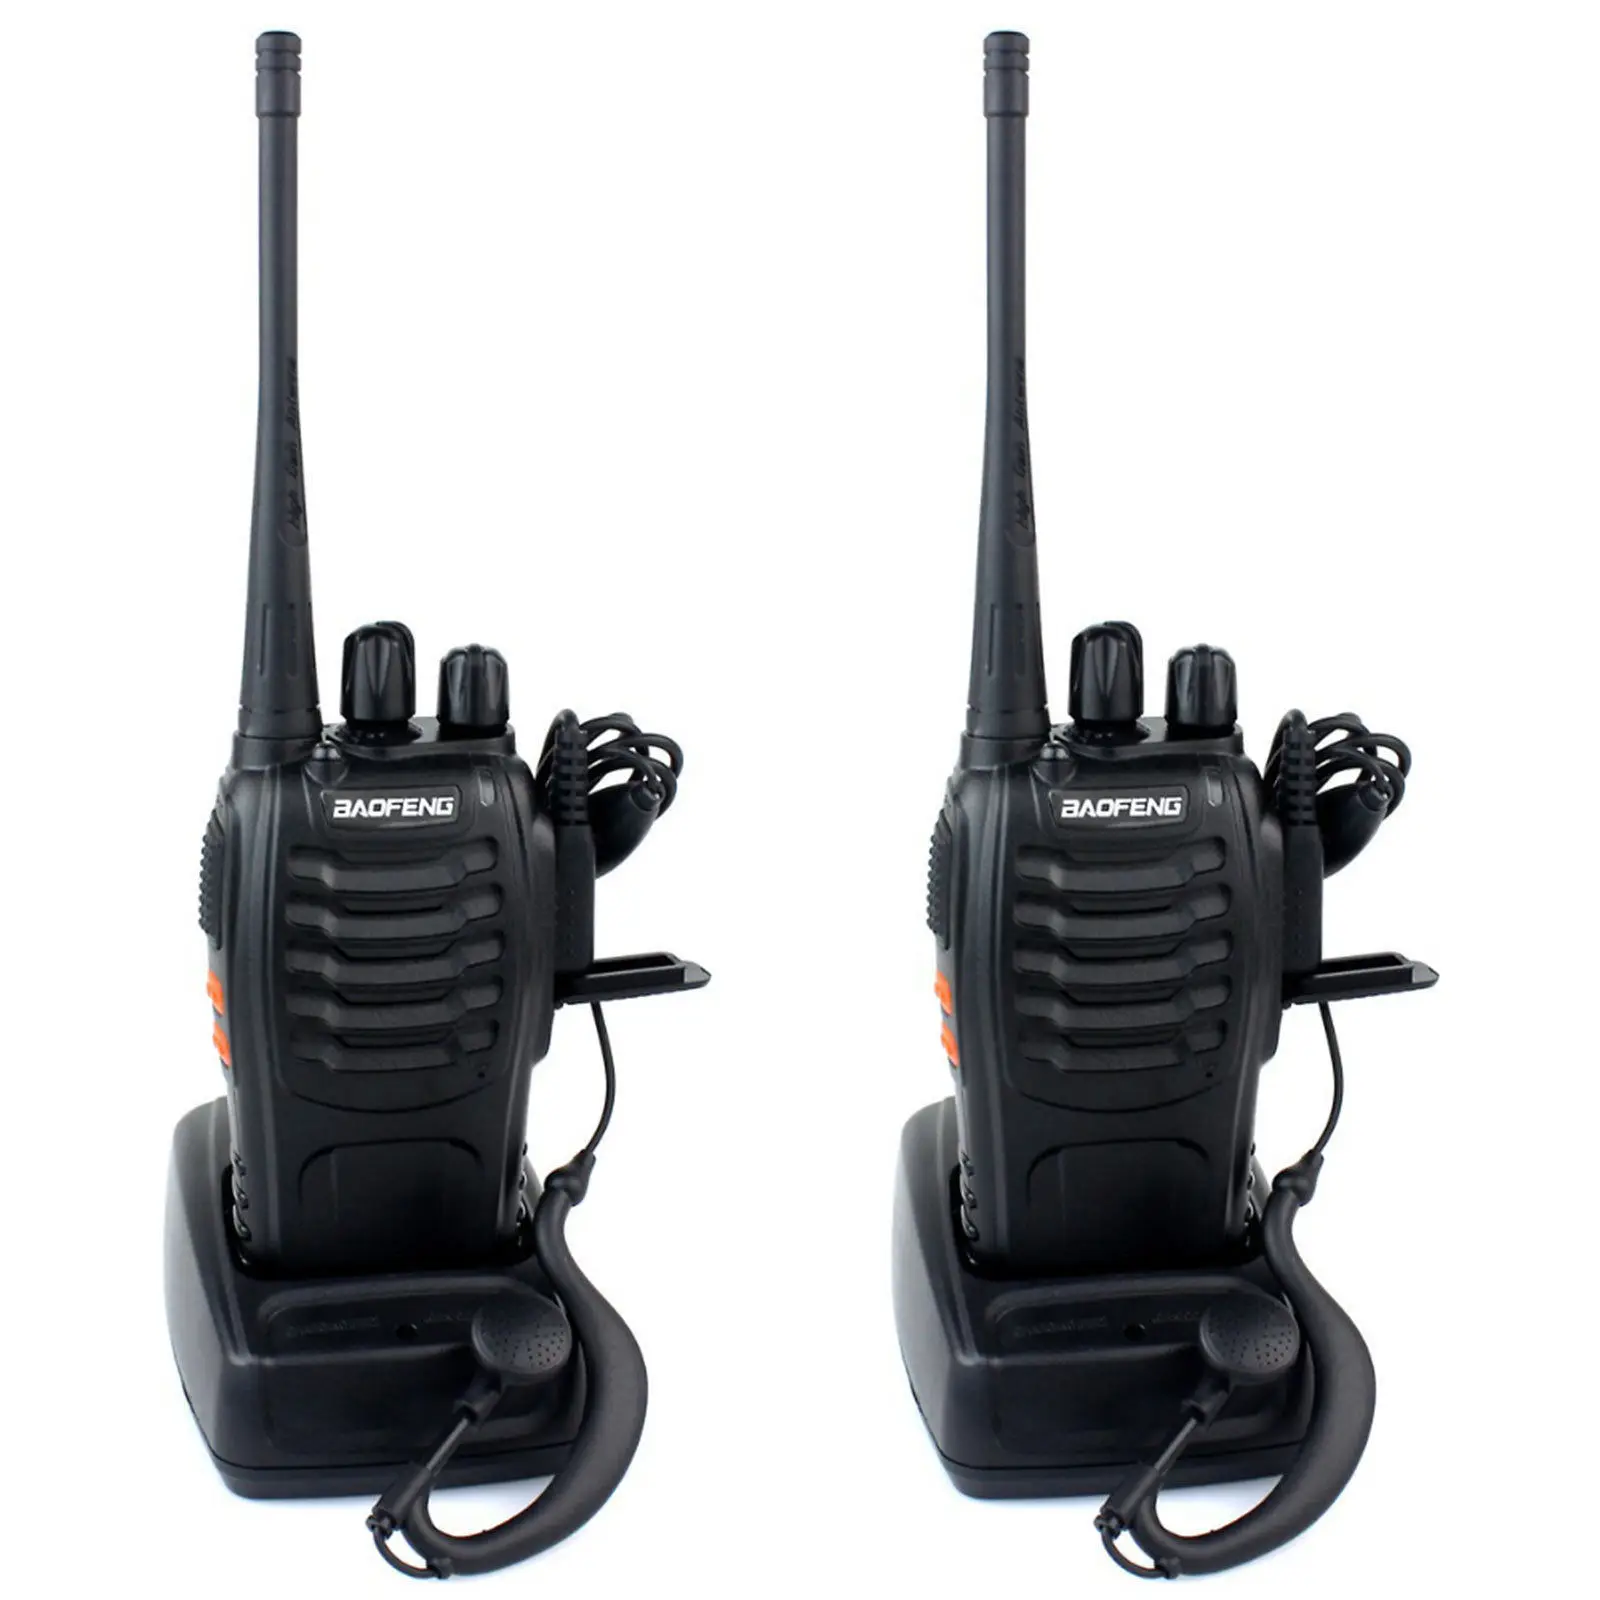 

Cheapest Wholesale Price Original 5W UHF 400-470 Mhz Baofeng Walkie talkie Baofeng 888S BF-888S